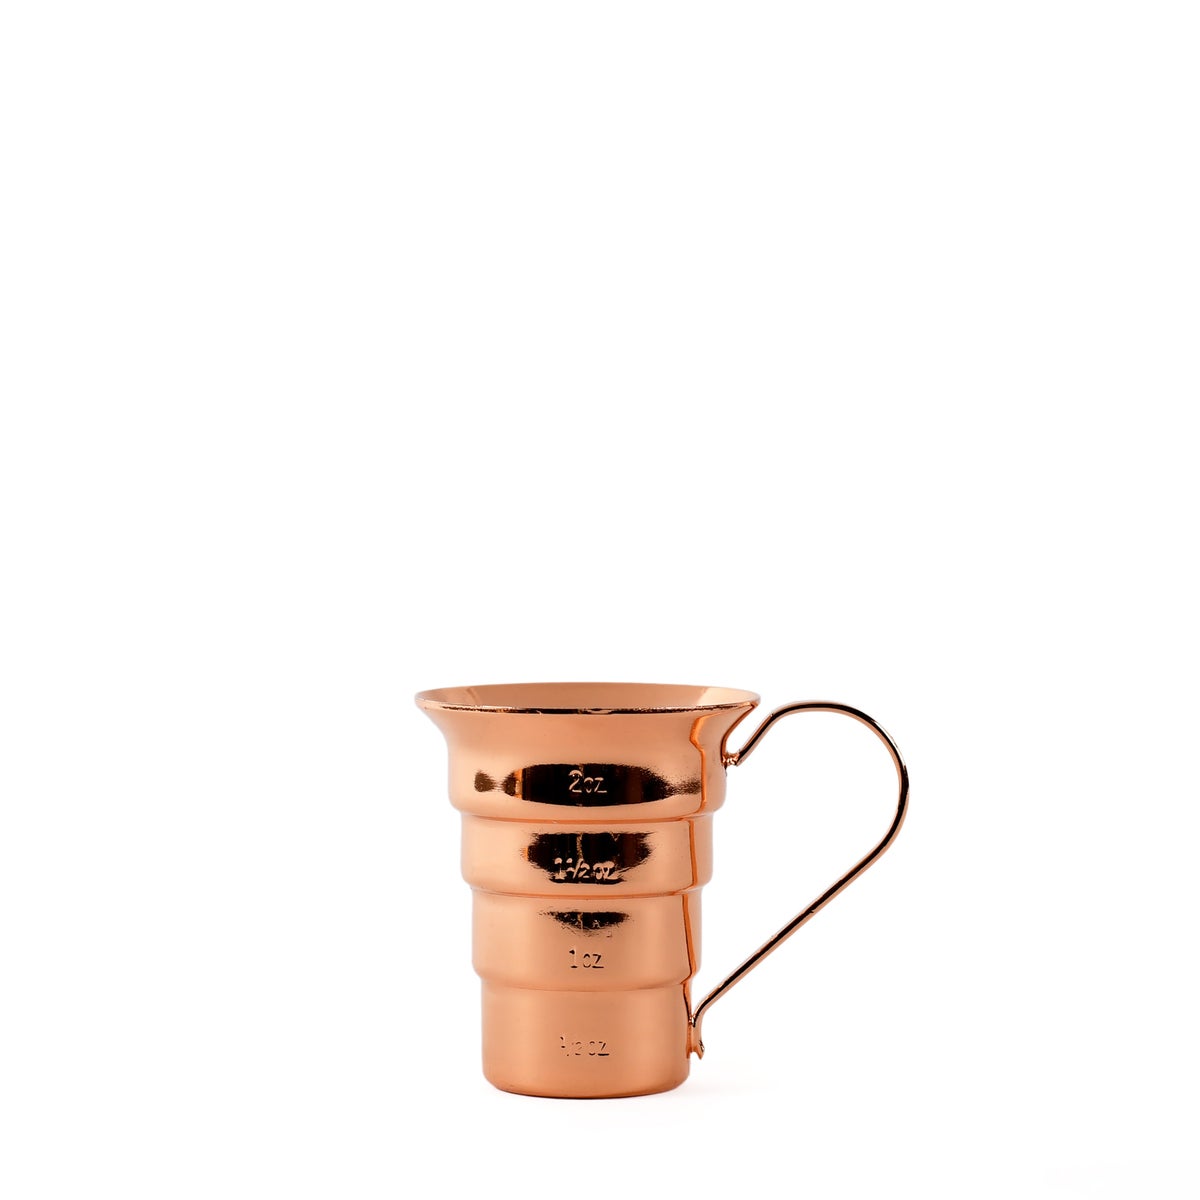 COCKTAIL KINGDOM - STEPPED JIGGER - COPPER PLATED